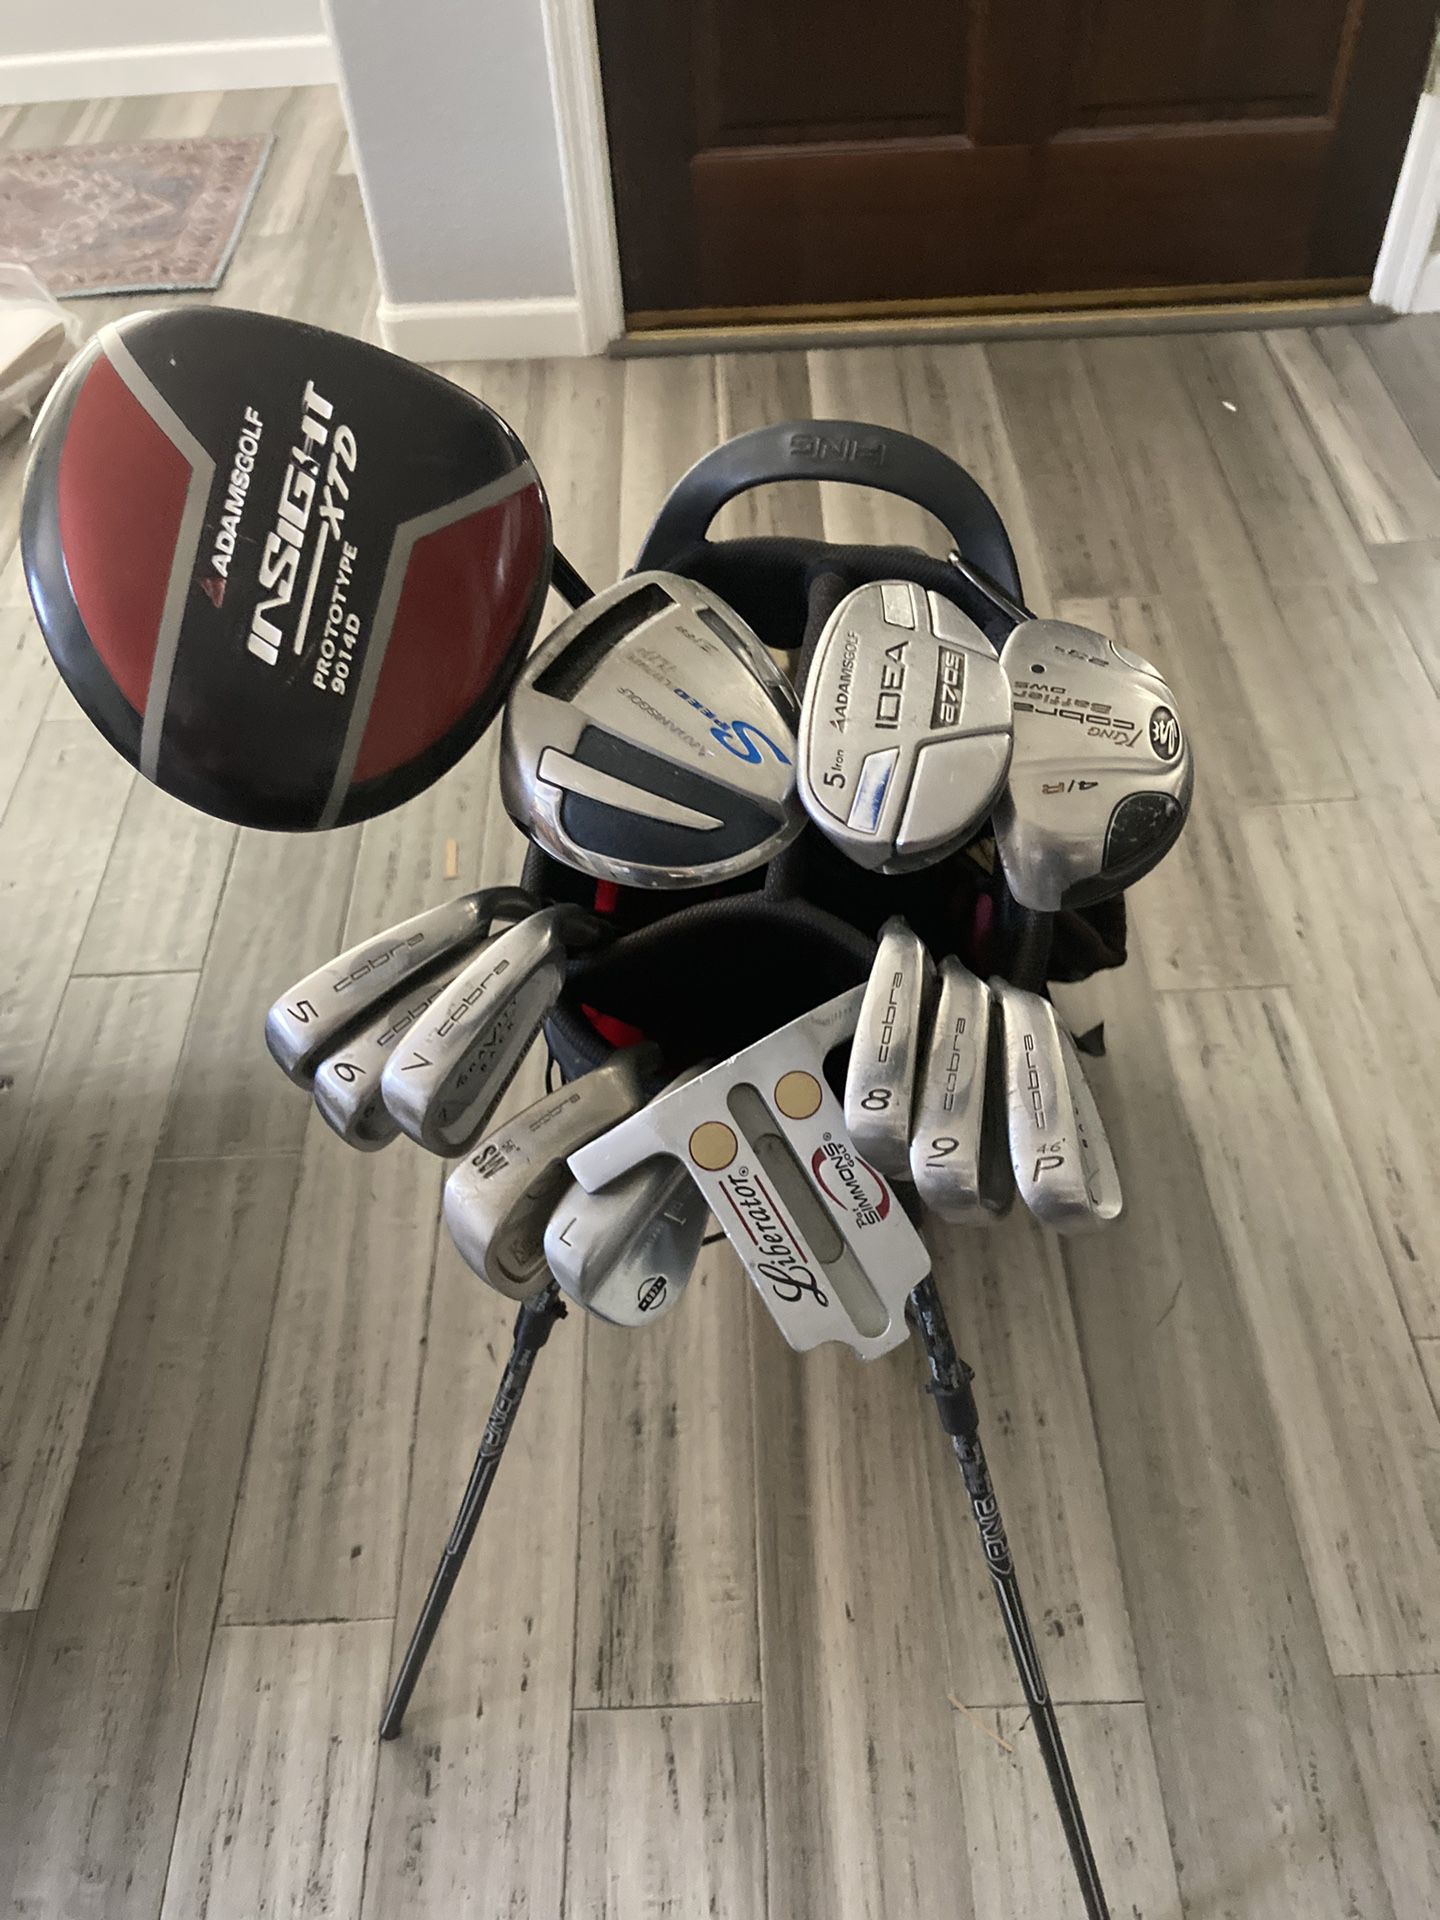 COMPLETE NAME BRAND GOLF CLUB SET IRONS WOODS DRIVER HYBRIDS WEDGES PUTTER  BAG COBRA ADAMS for Sale in Scottsdale, AZ - OfferUp